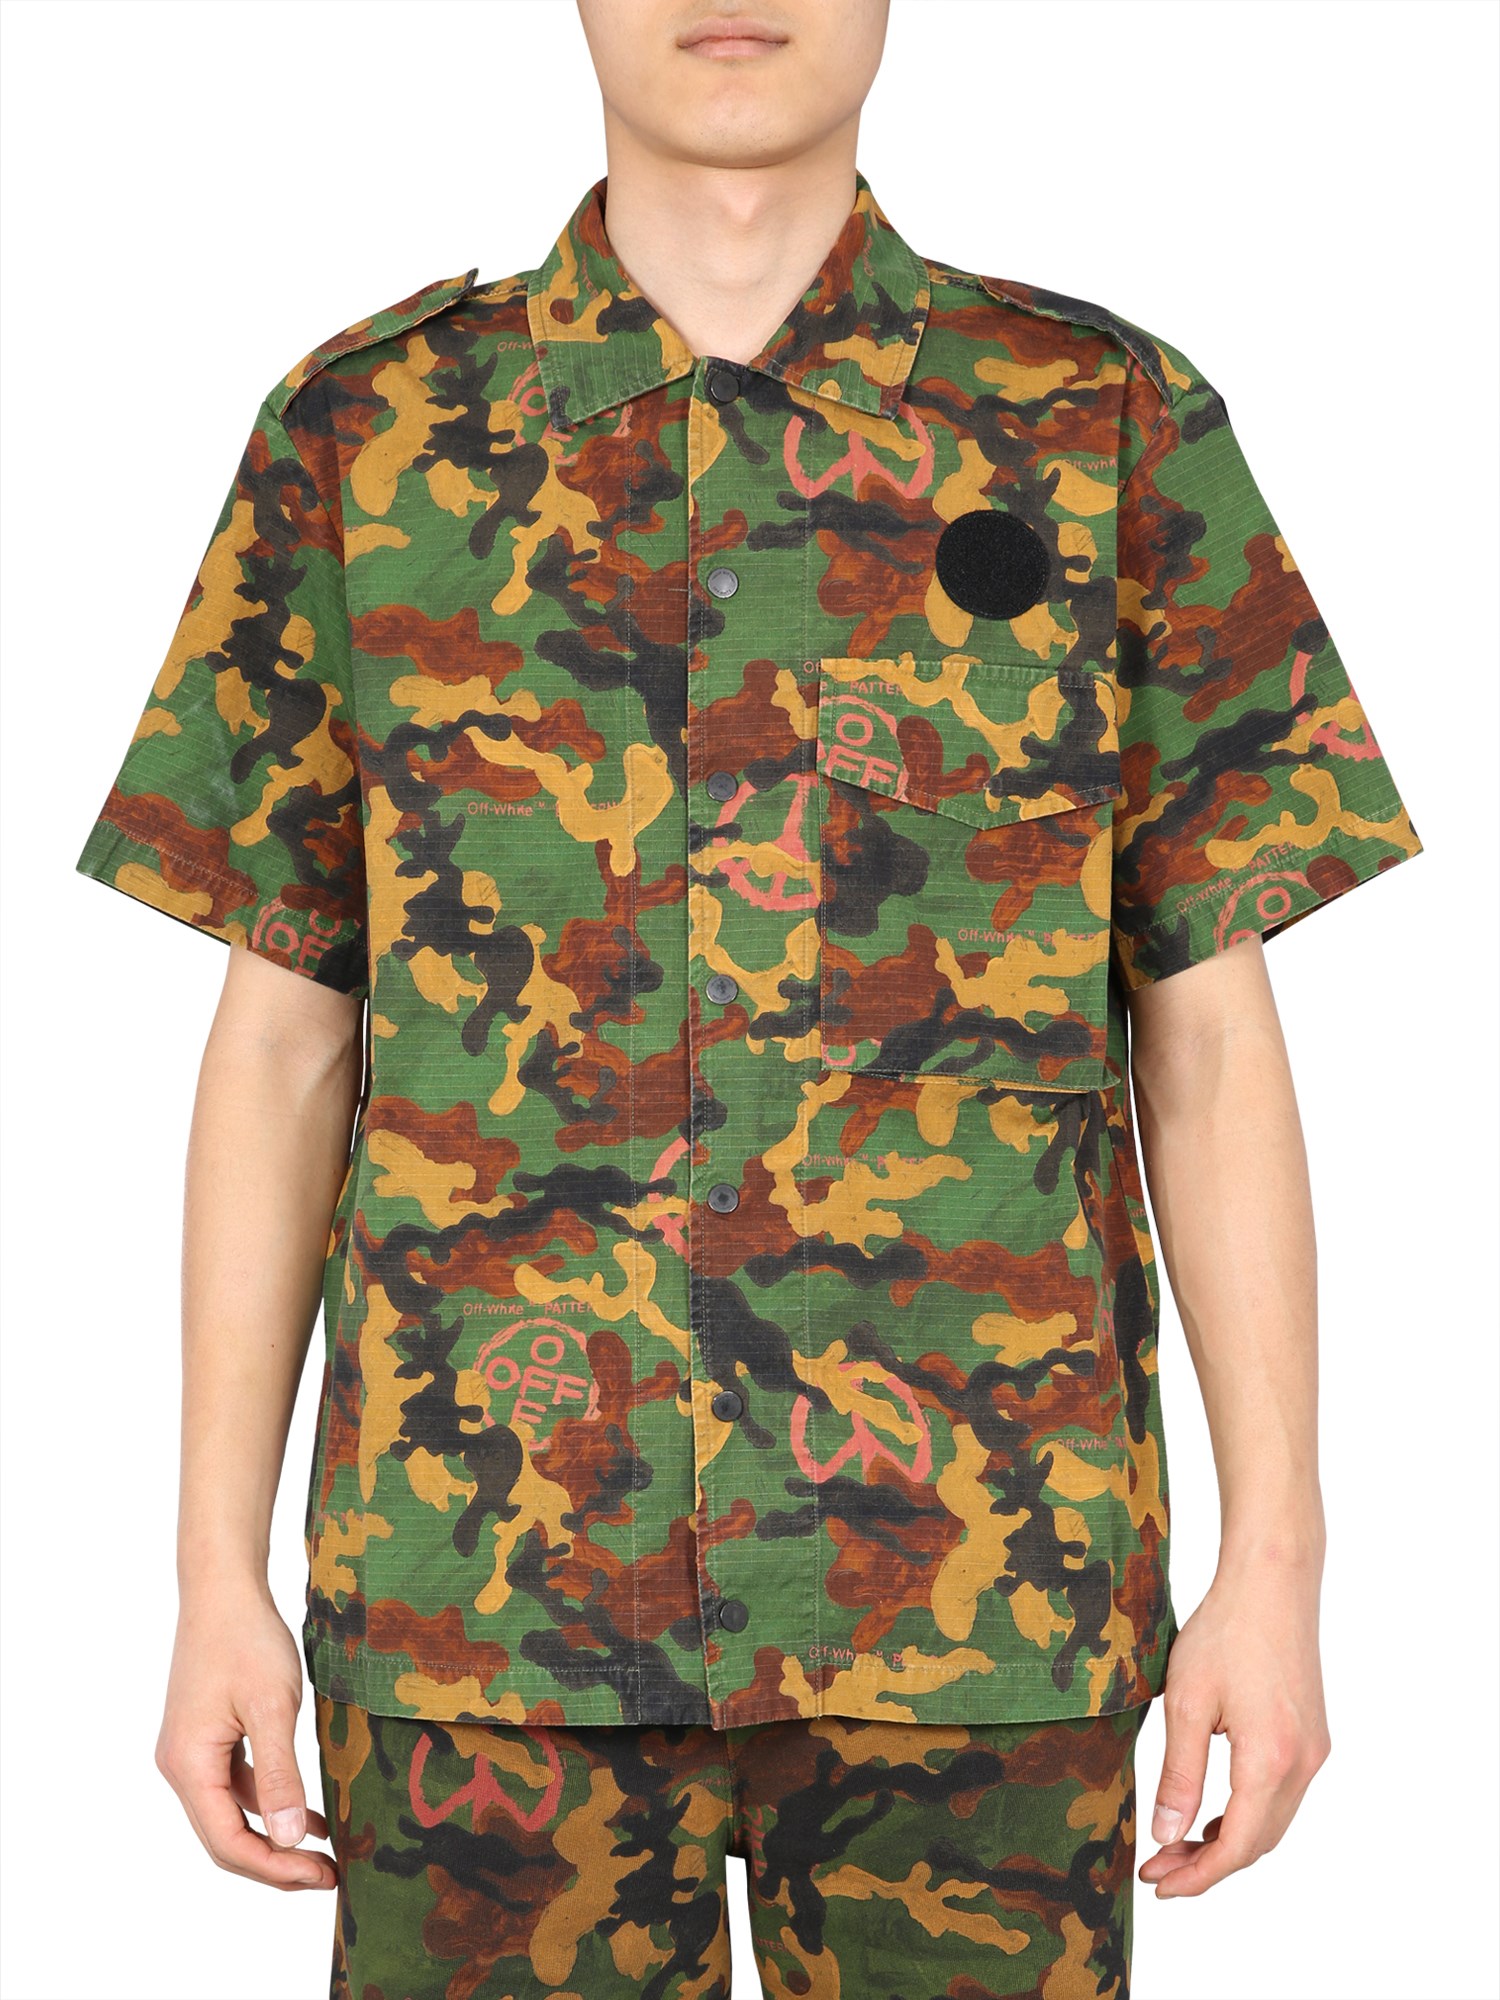 off-white camouflage shirt